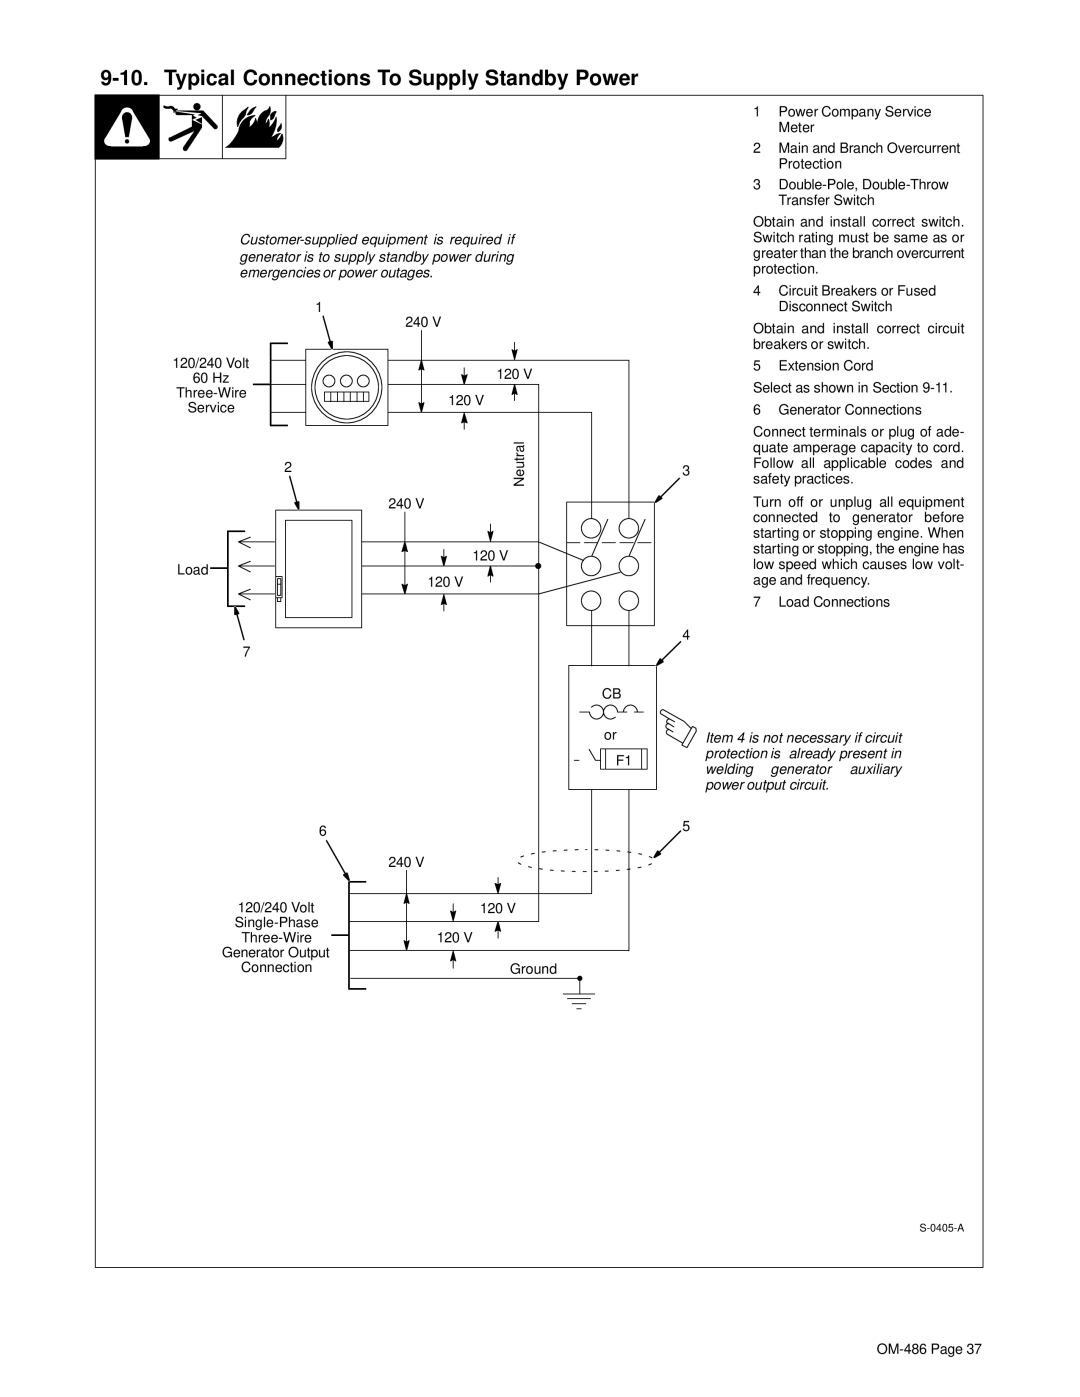 Miller Electric 251 NT manual Typical Connections To Supply Standby Power, 240 120 Ground 